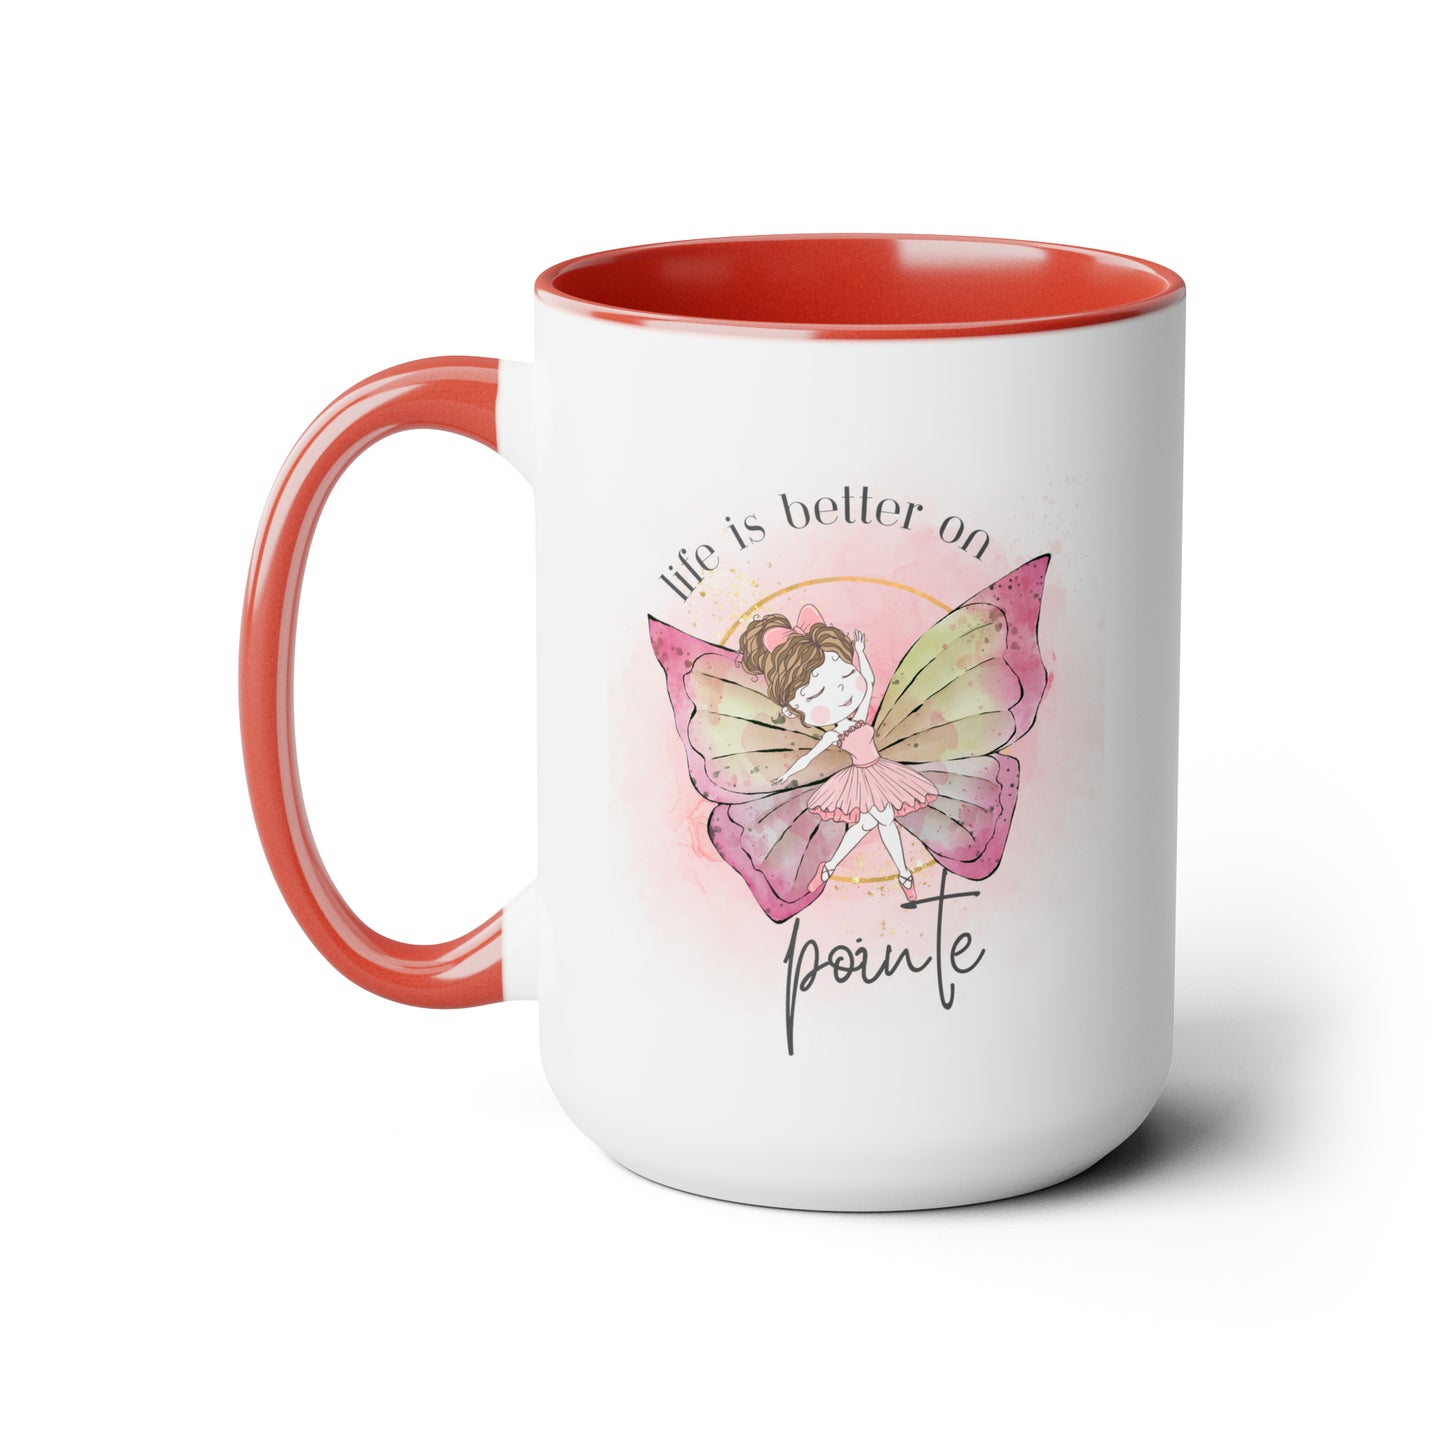 Two-Tone Coffee Mugs - Young Ballerina With Butterfly Wings